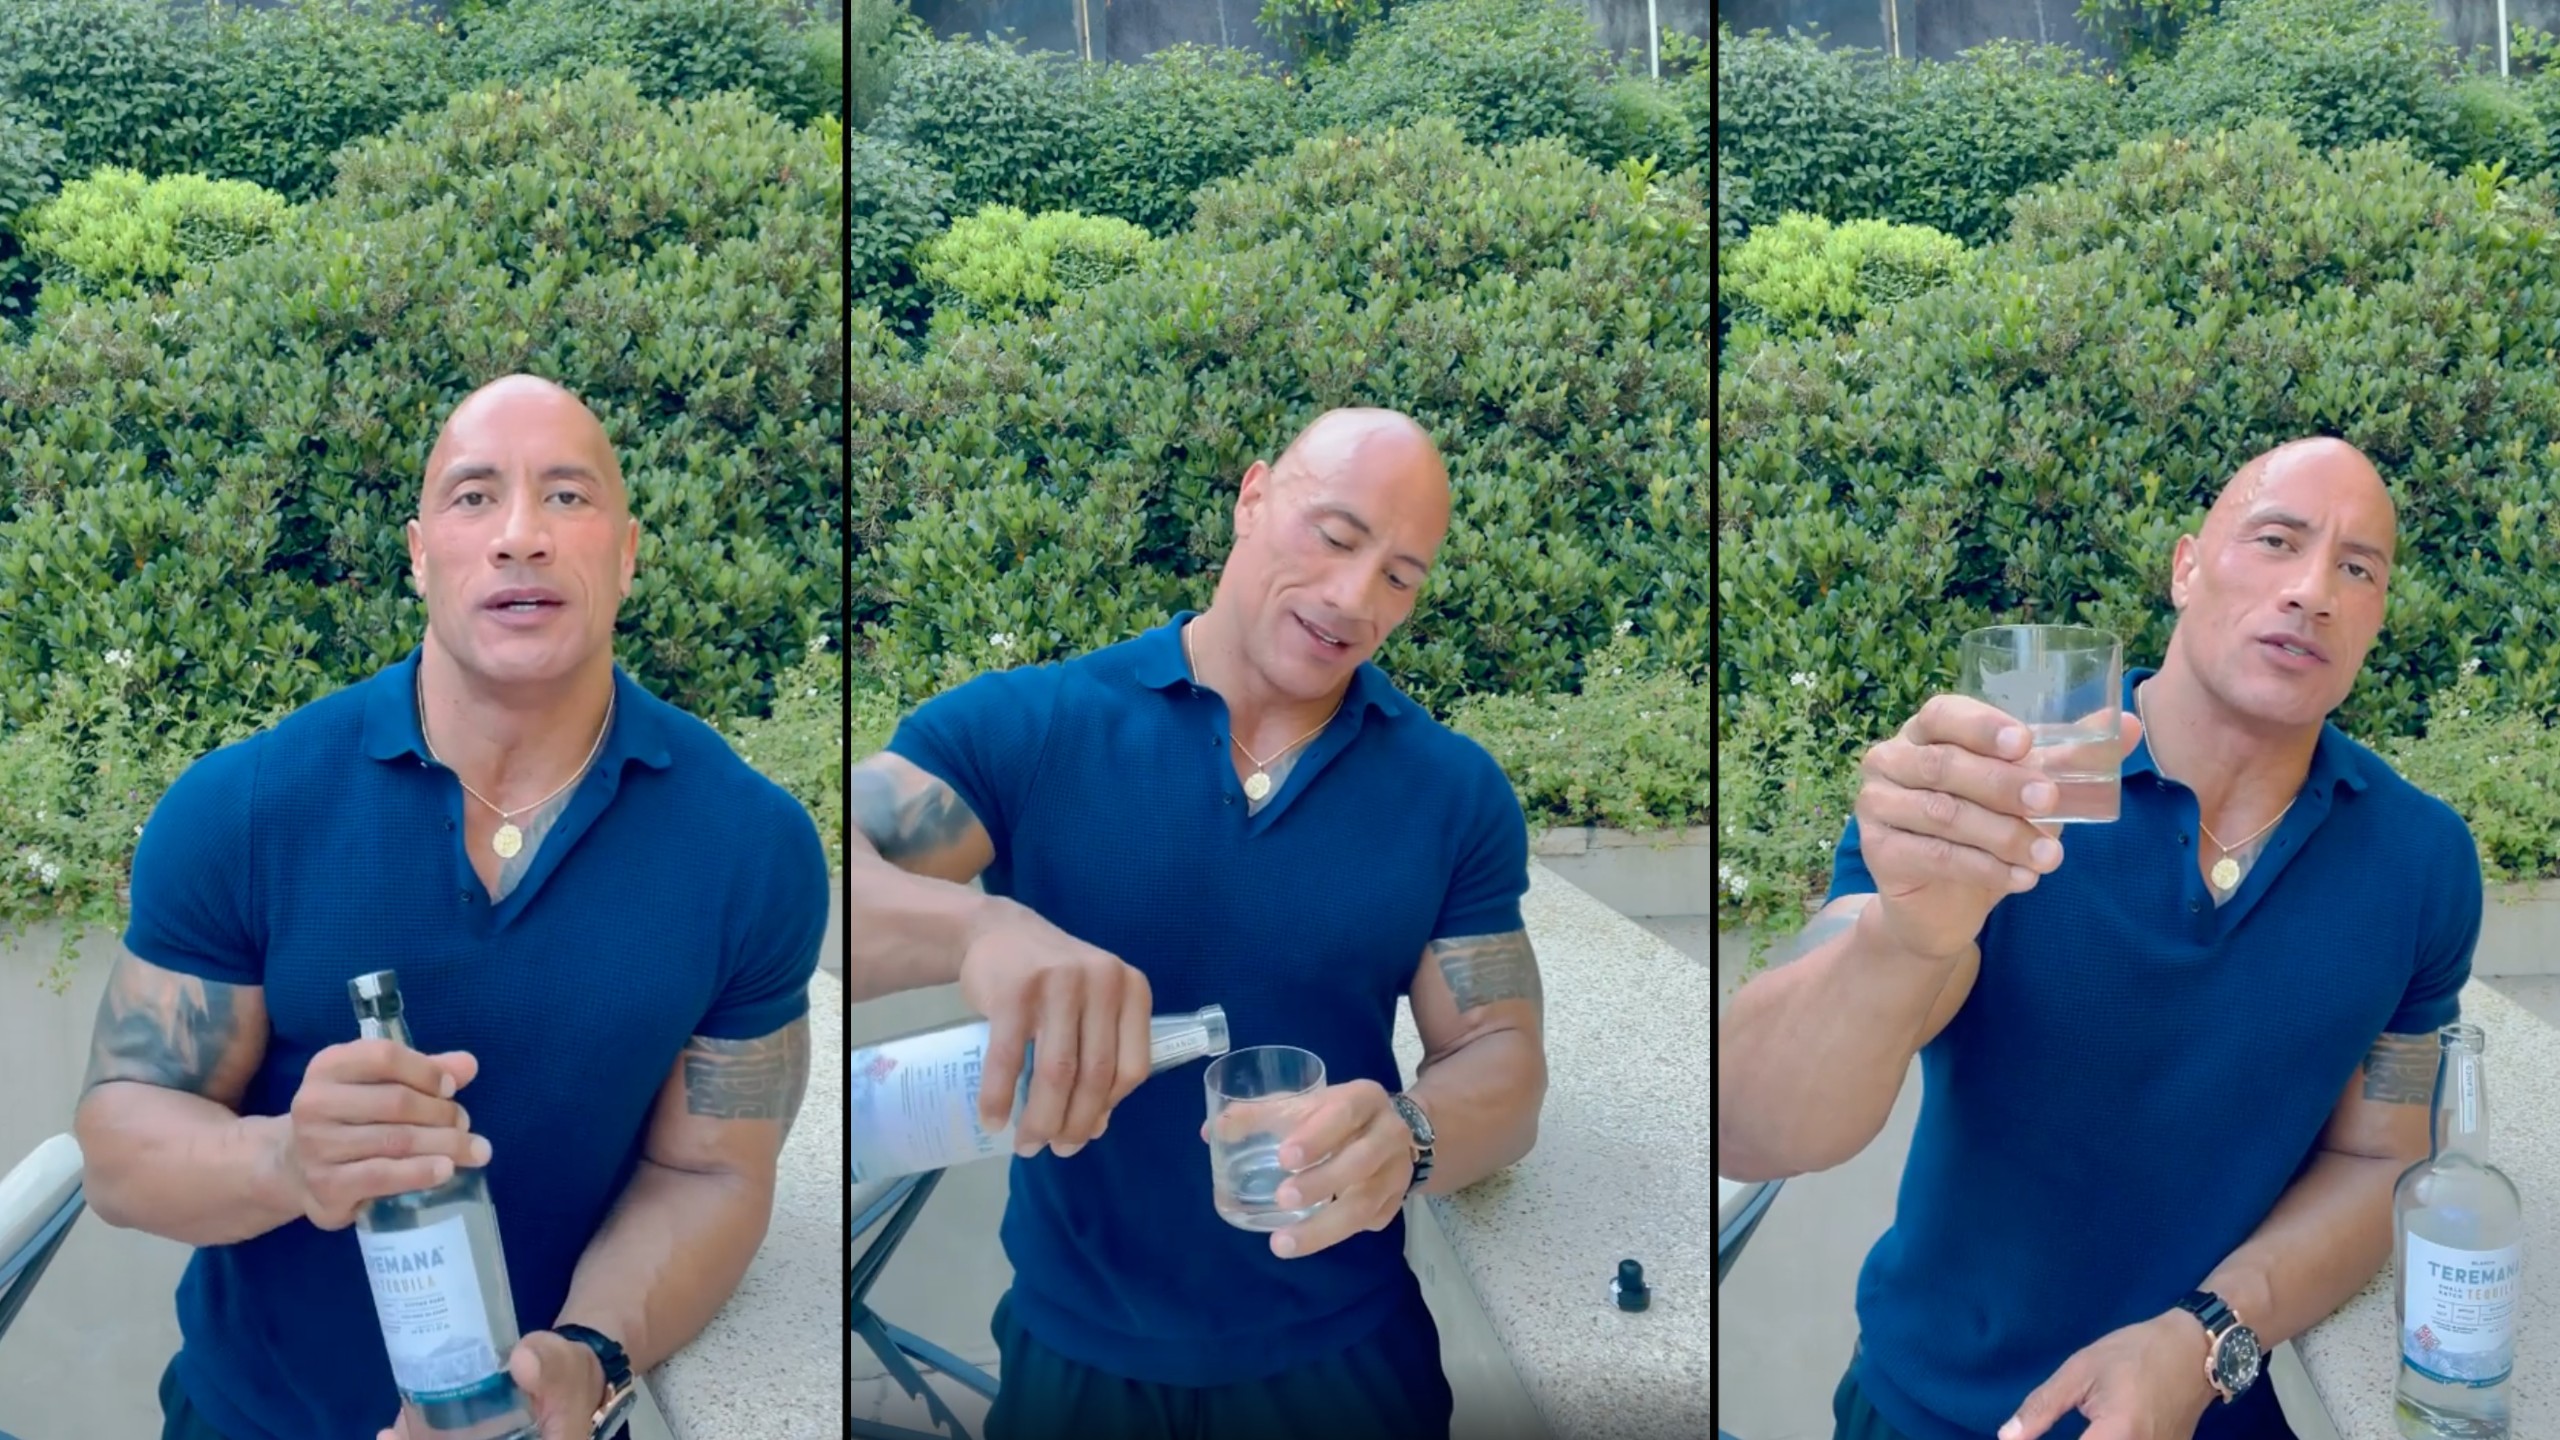 The Rock toasts fellow dads on Father's Day